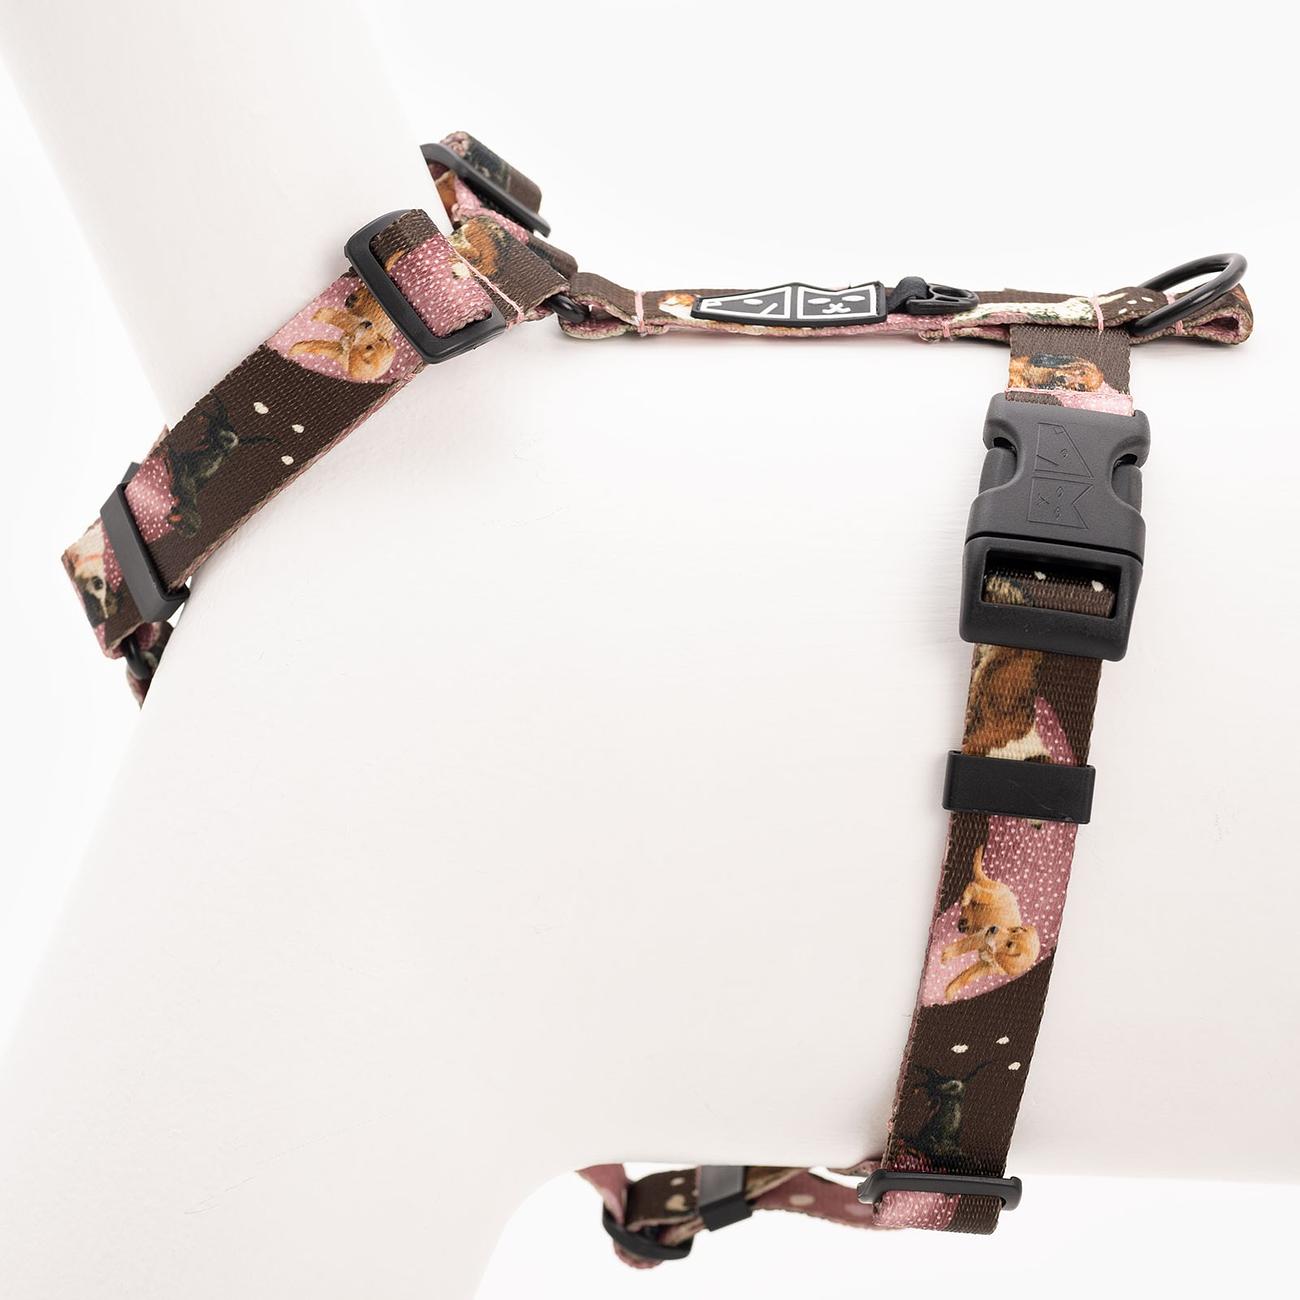 Stay-on guard harness "Too sweet to handle"